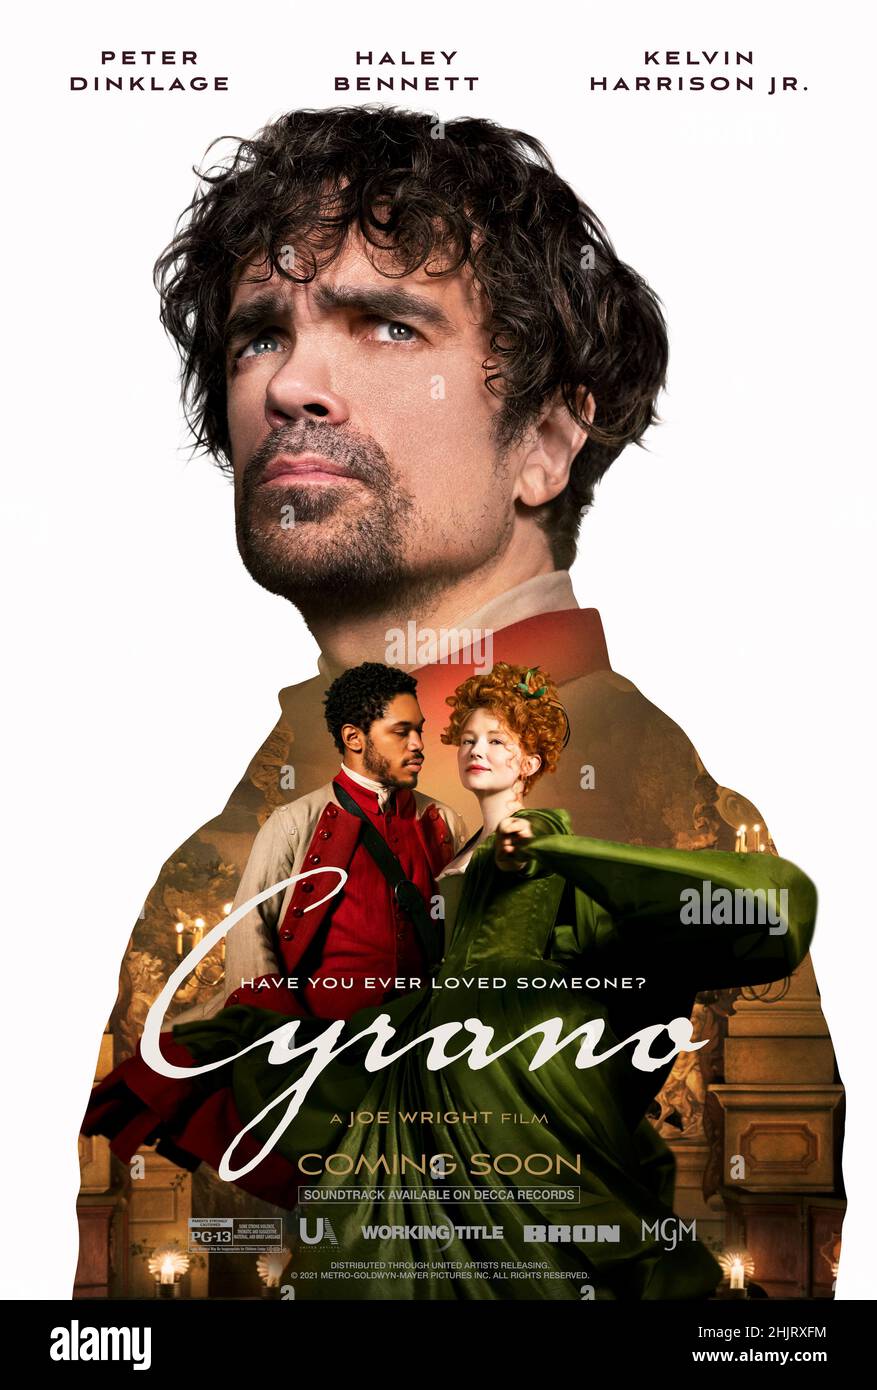 Cyrano (2021) directed by Joe Wright and starring Peter Dinklage, Haley Bennett and Kelvin Harrison Jr. Too self-conscious to woo Roxanne himself, wordsmith Cyrano de Bergerac helps young Christian nab her heart through love letters. Stock Photo